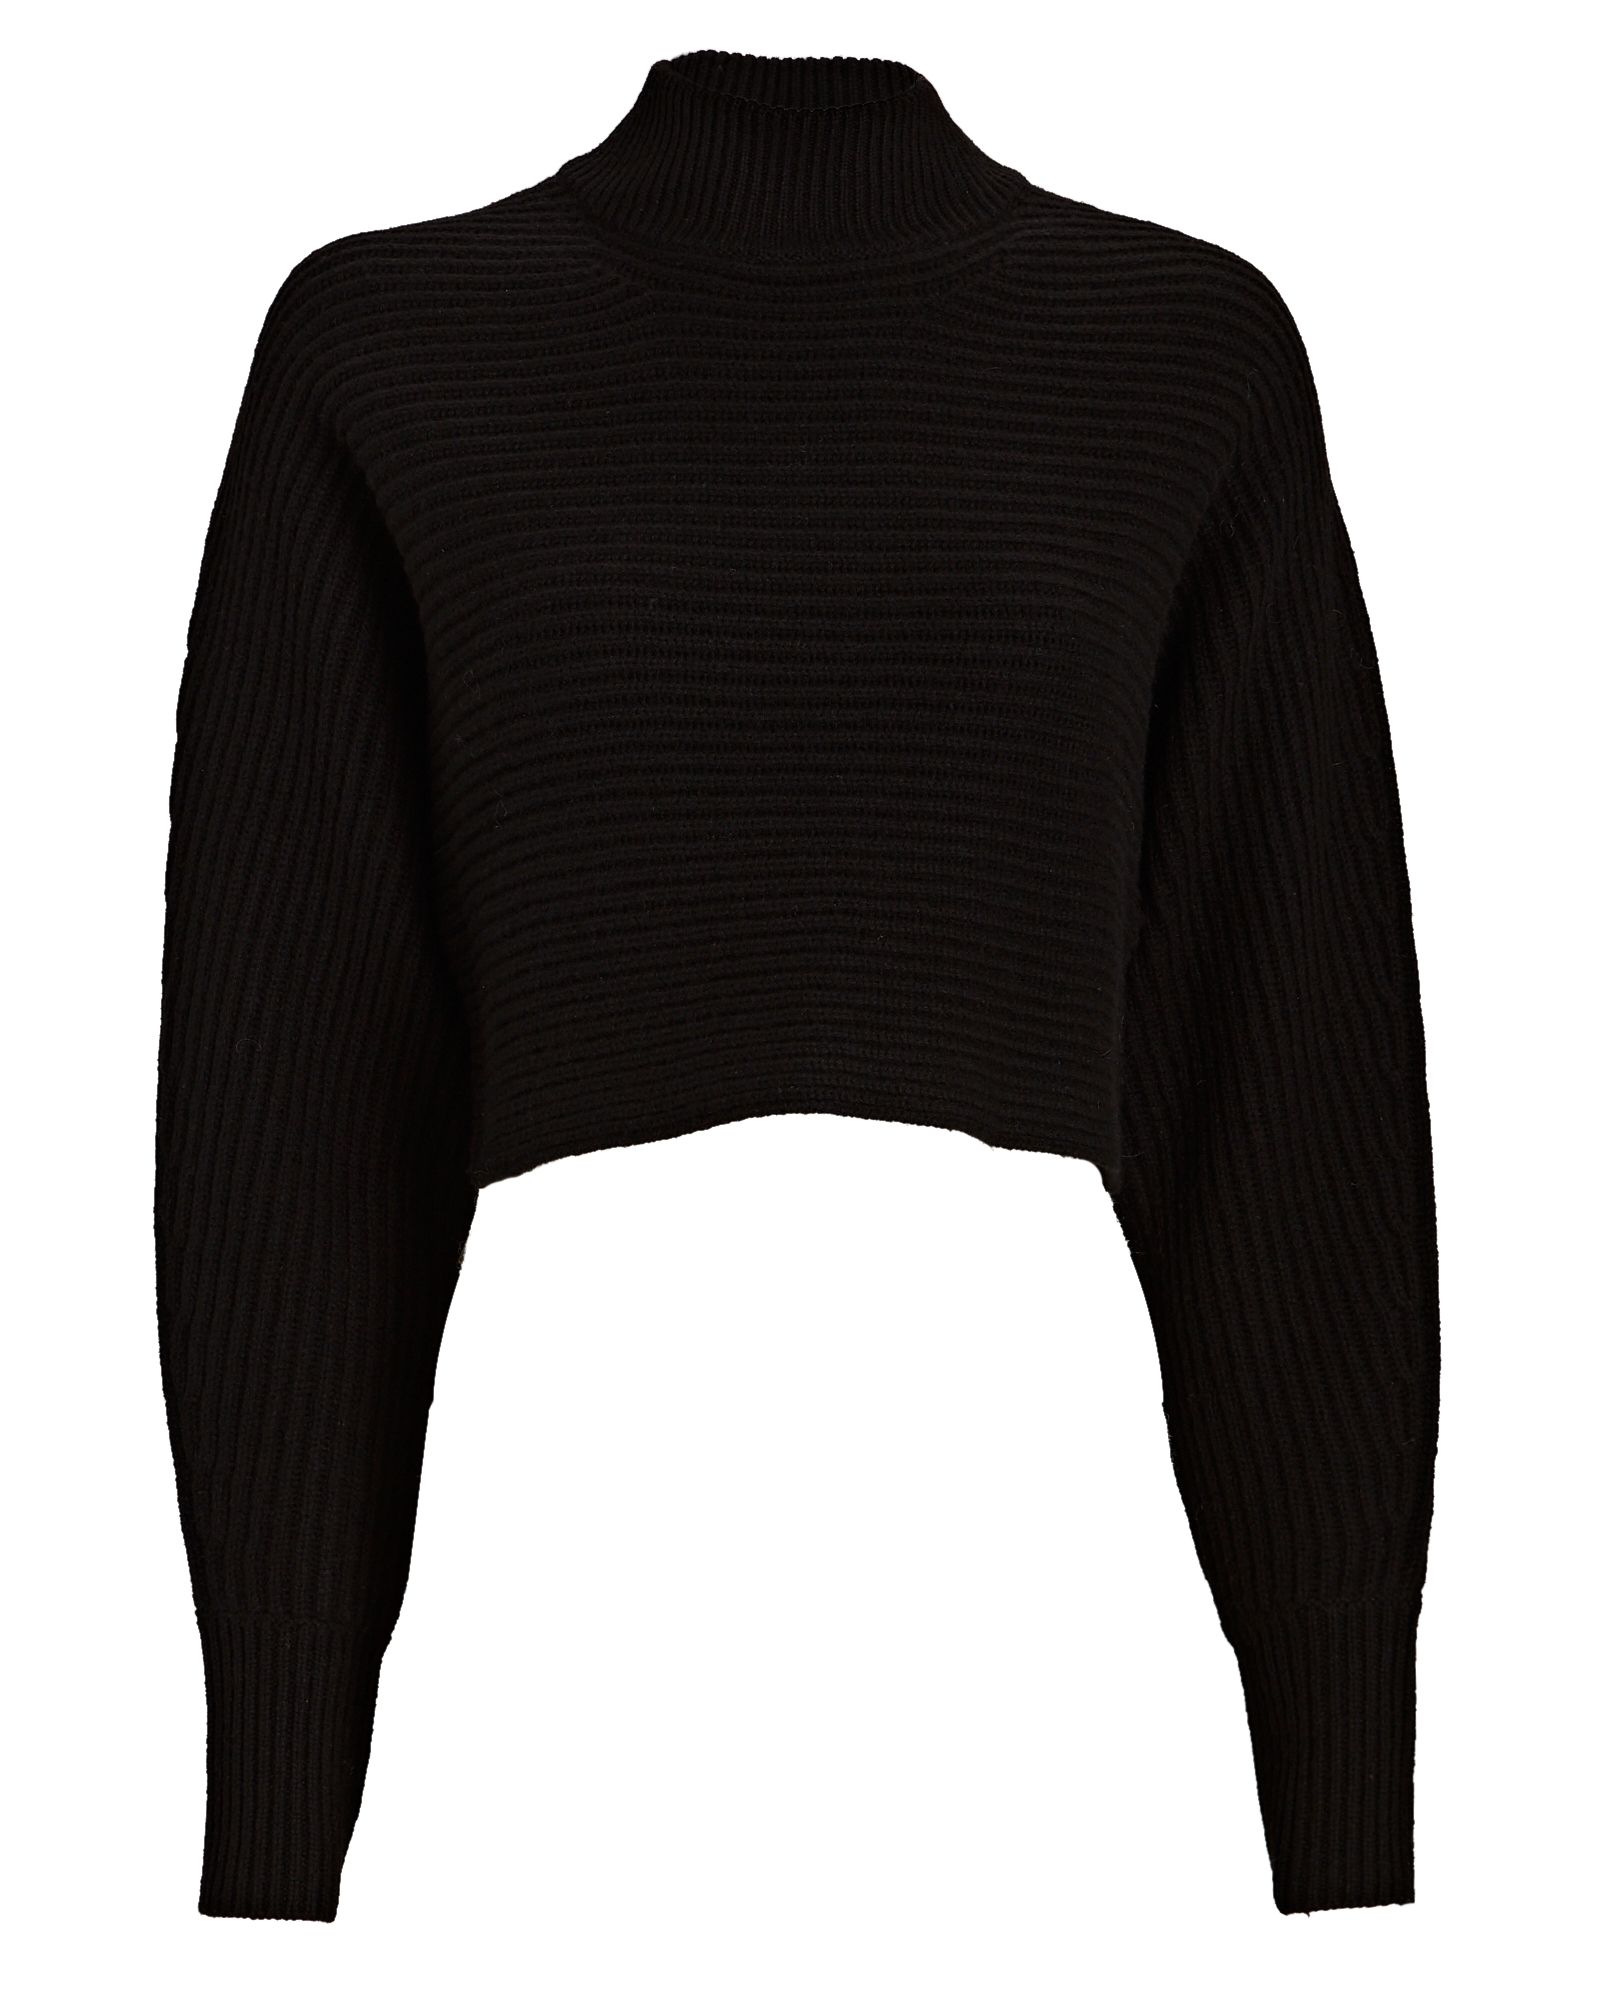 INTERMIX Private Label Fay Cropped Turtleneck Sweater in black | INTERMIX®